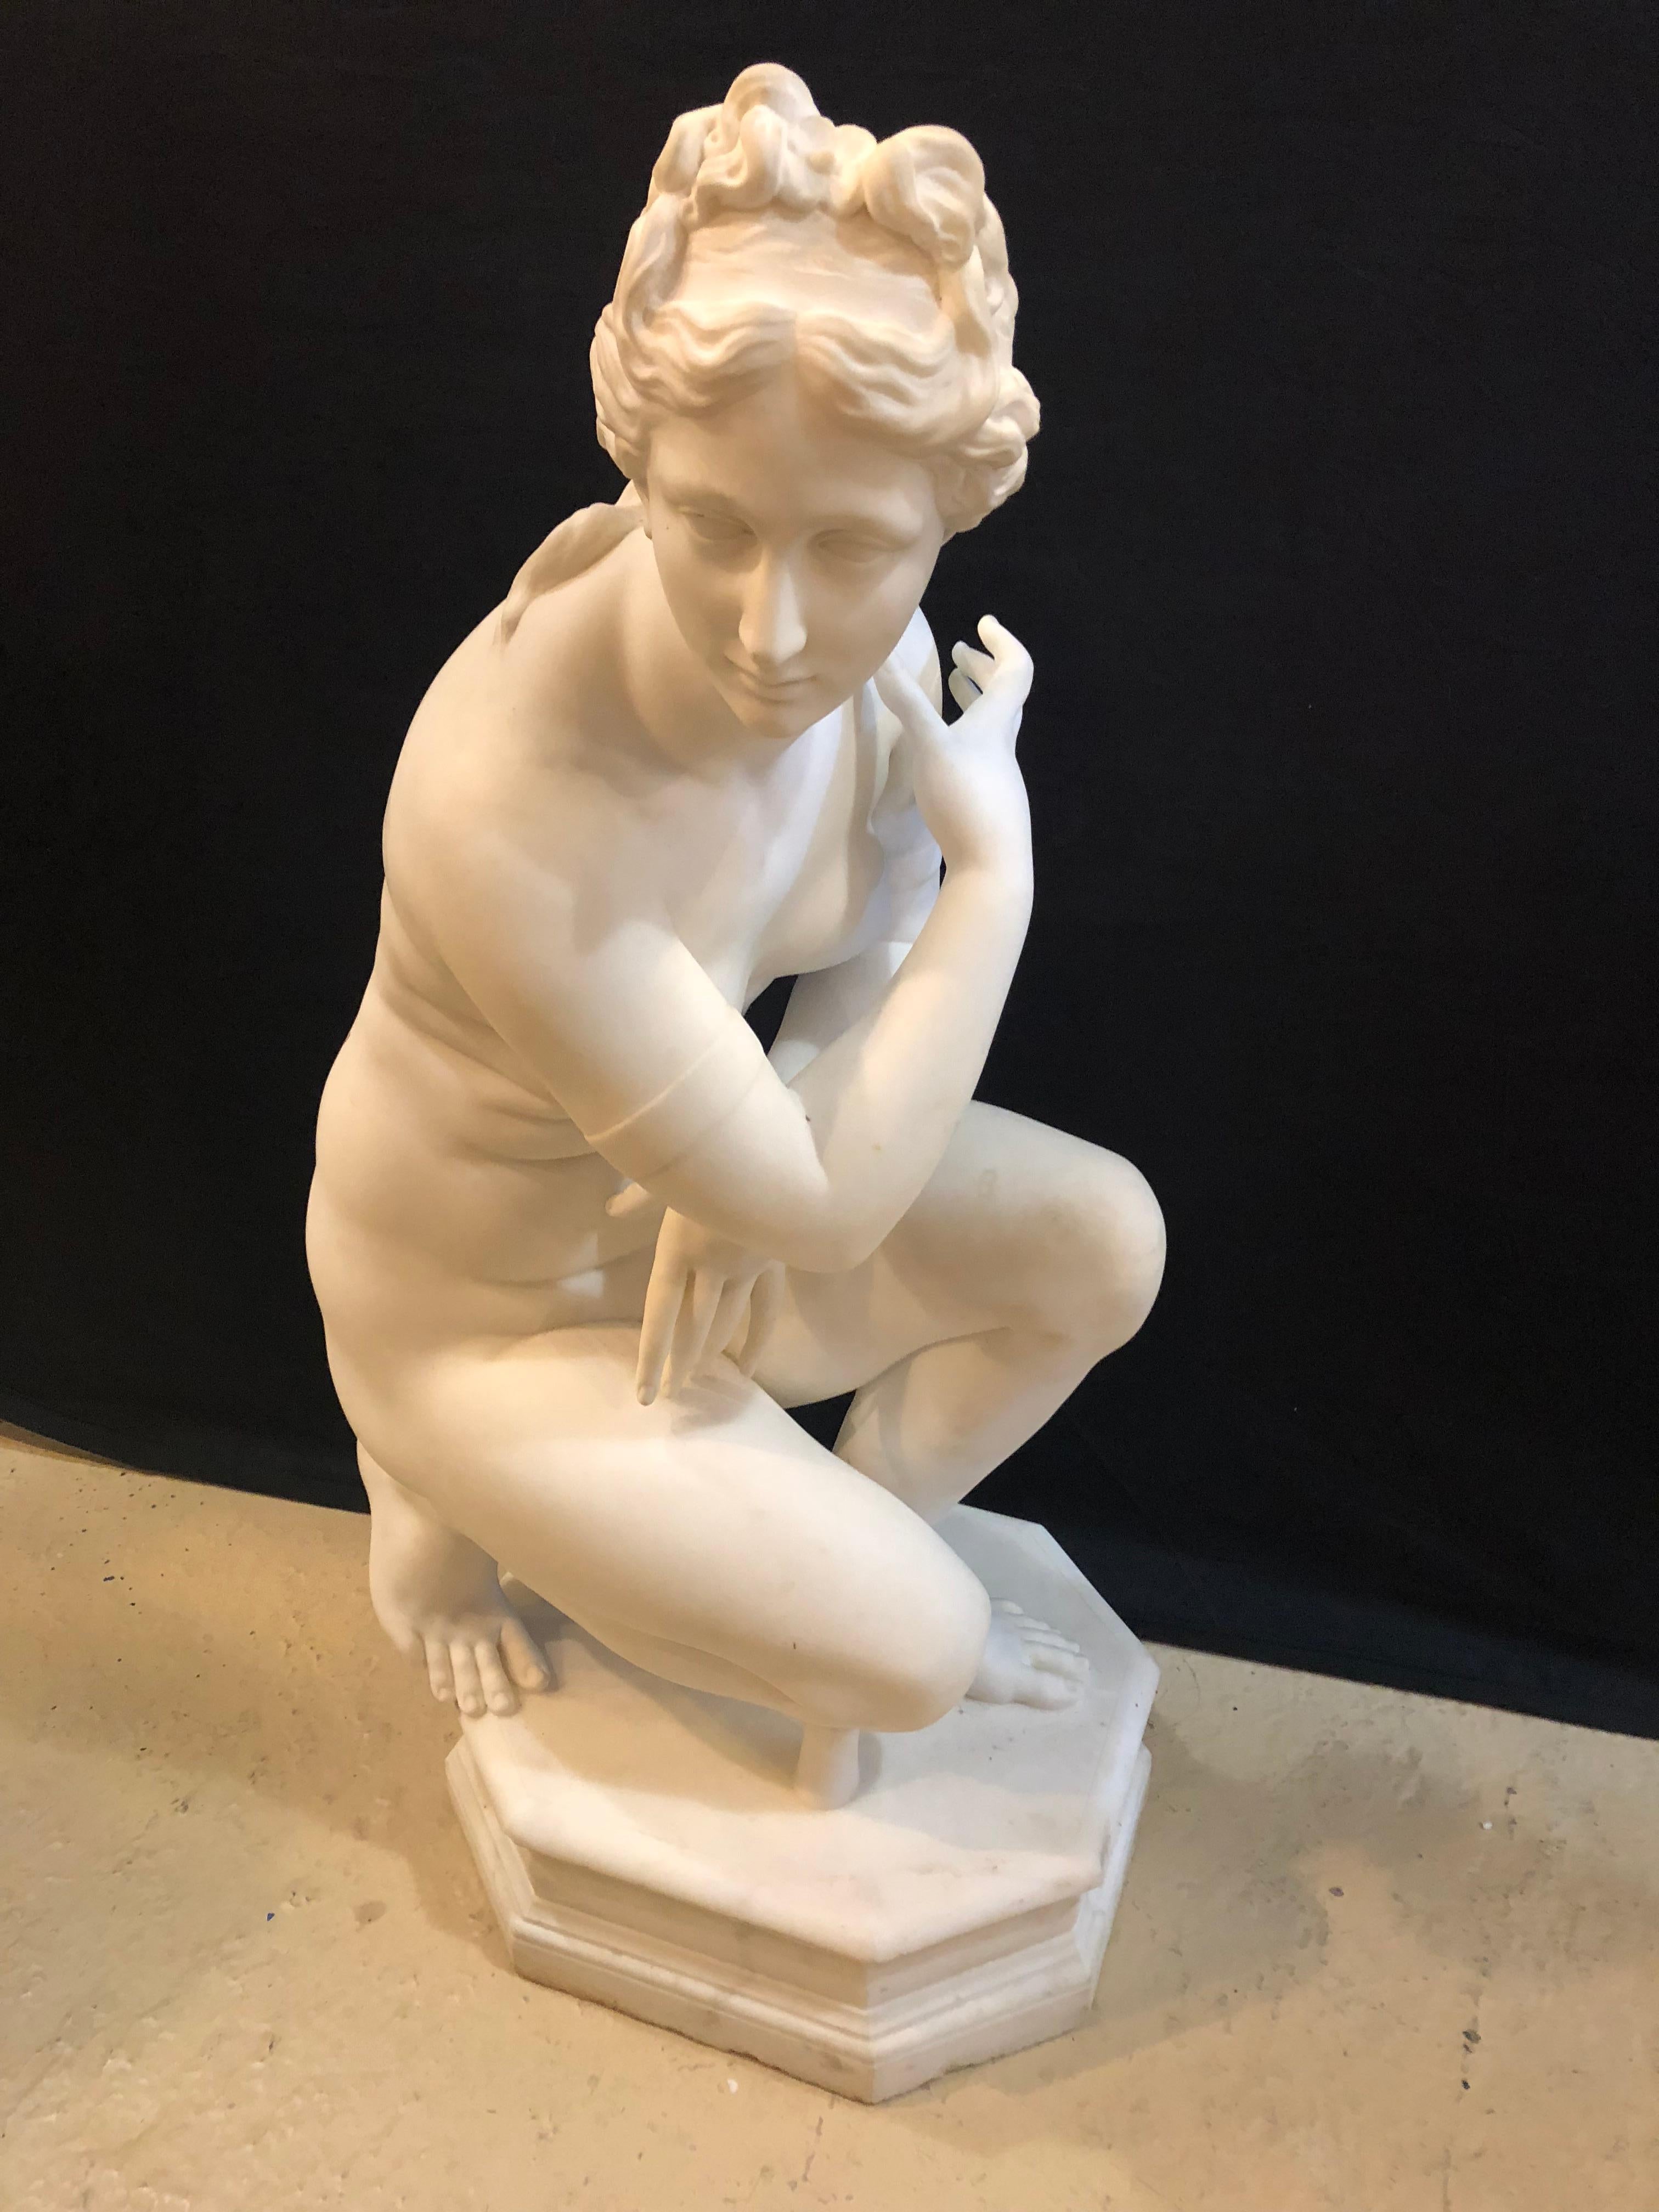 A 19th century white Carrara marble of a nude life sized figure kneeling. She is everything one could dream of. This fantastic life-sized semi-nude maiden is trying desperately to hide her ample breasts while kneeling upon a rock. The detail is